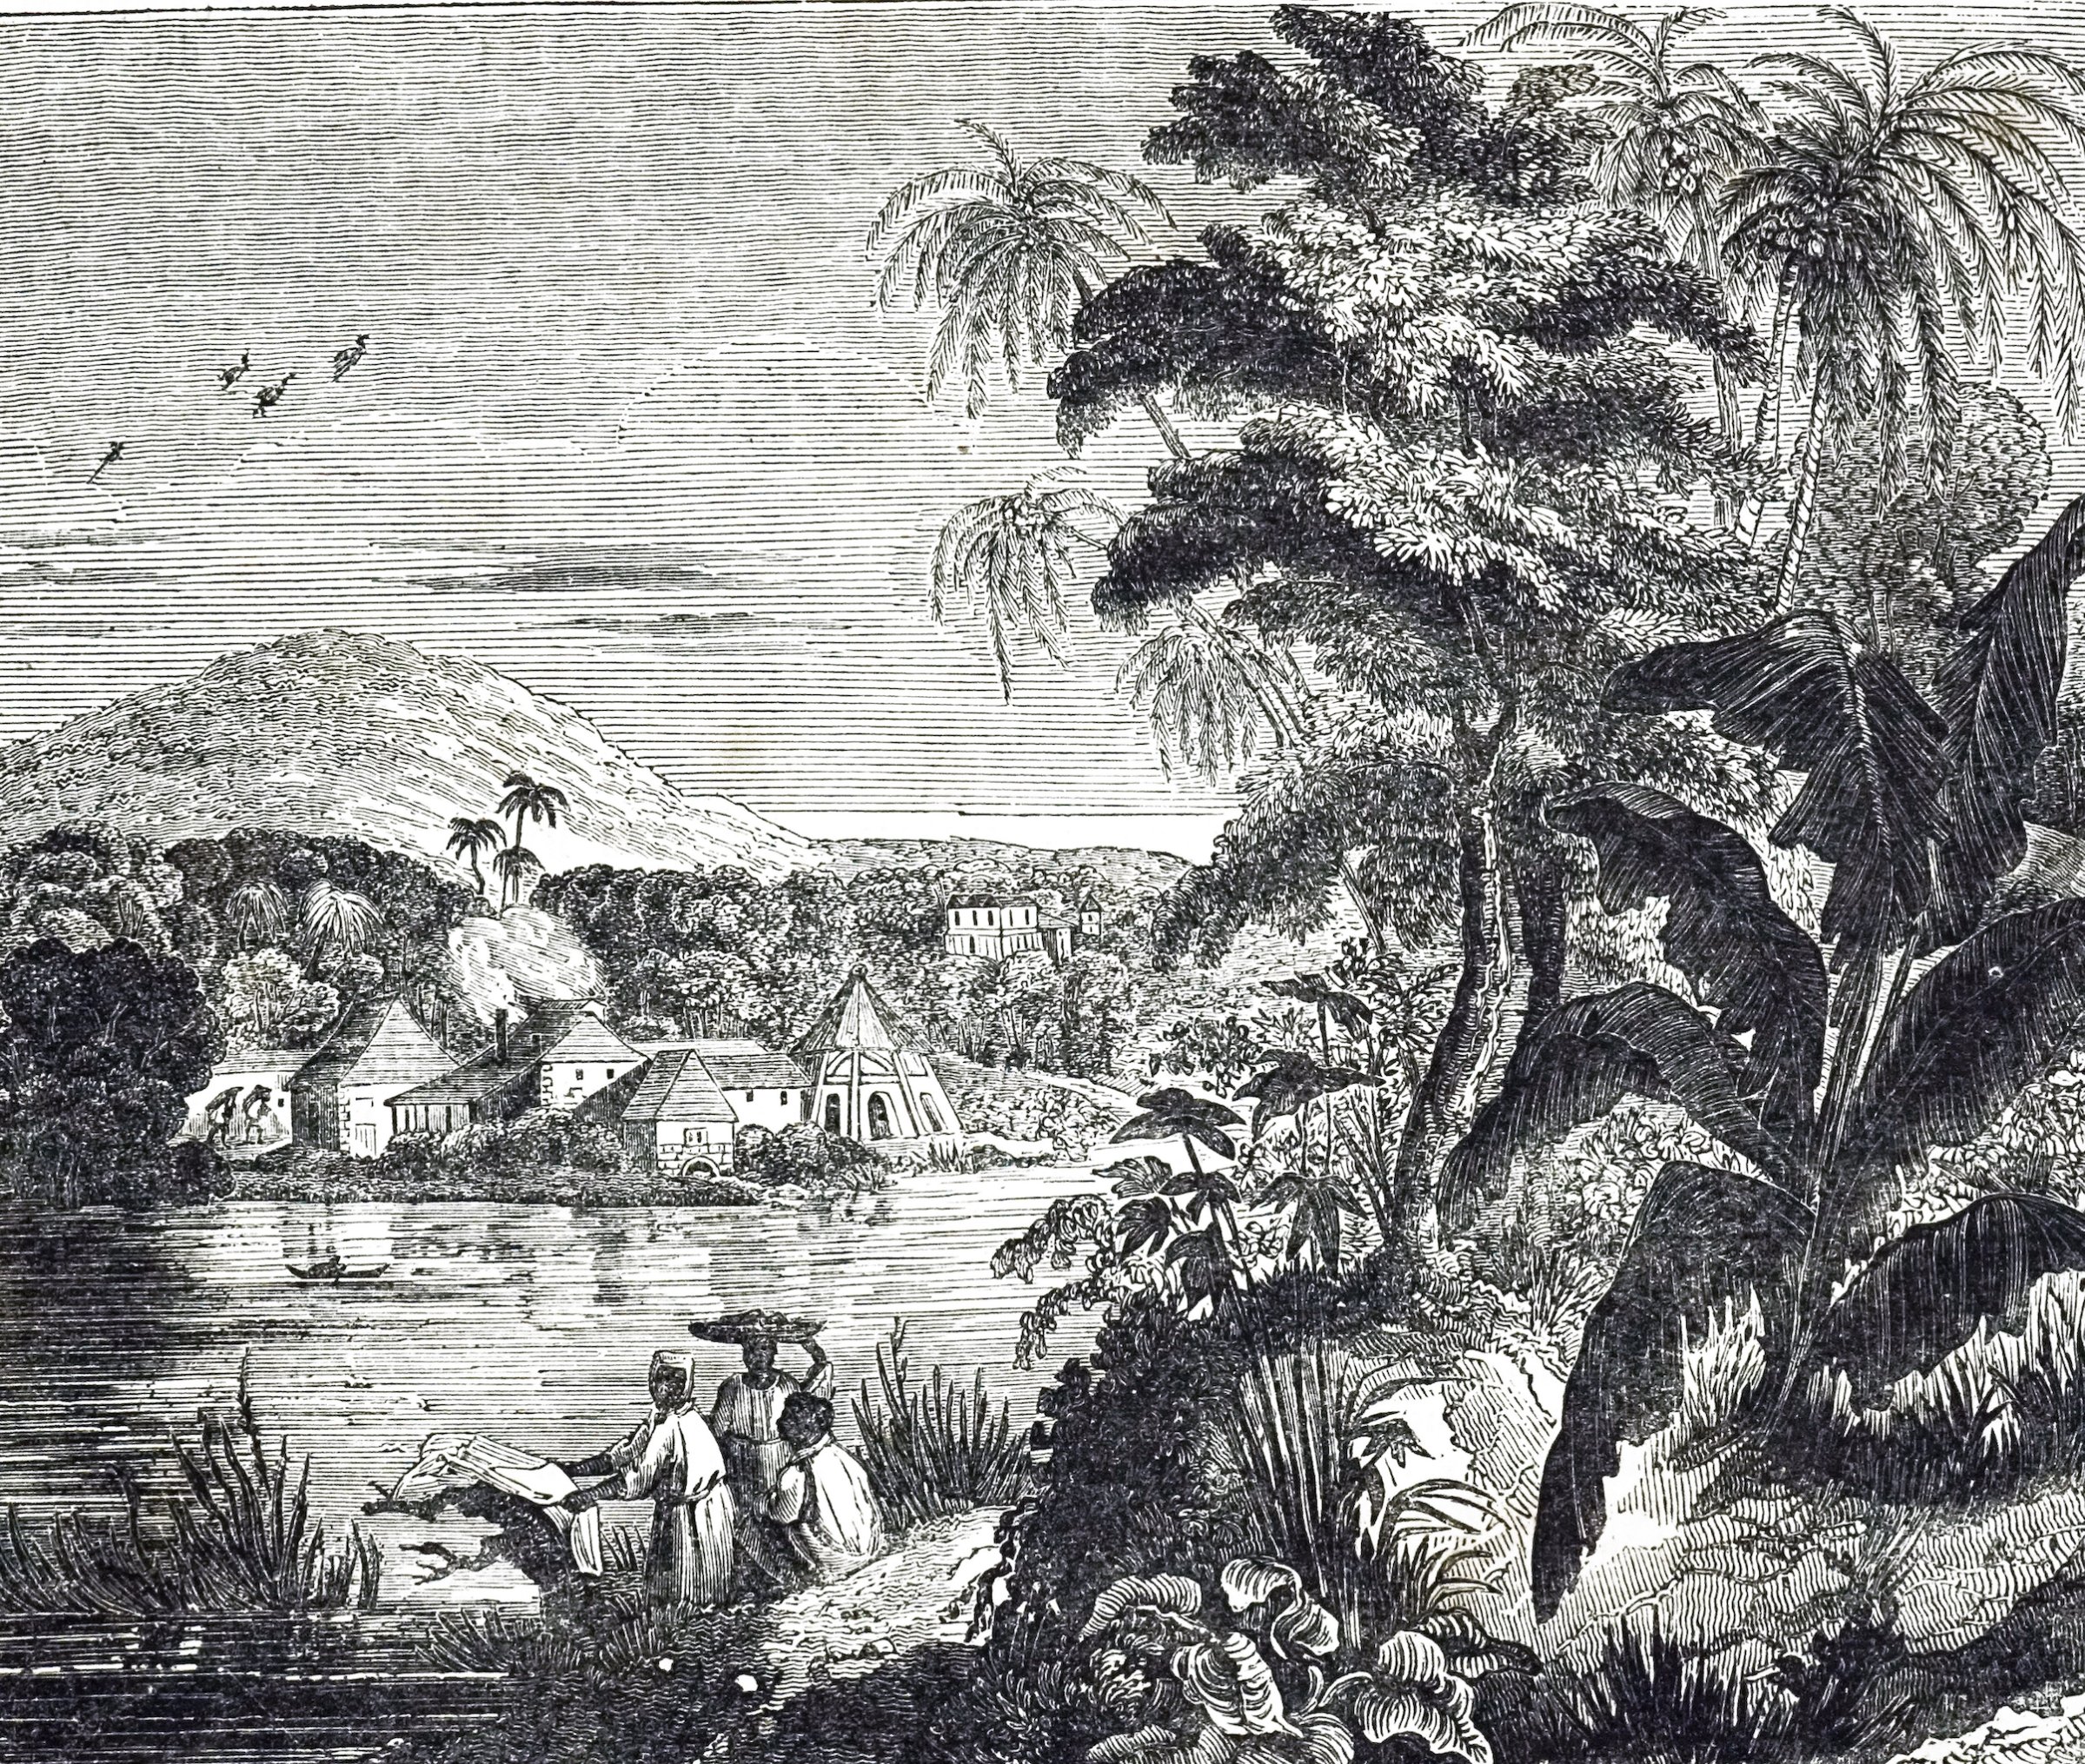 An engraving depicting a Jamaican sugarcane plantation during the sugar boom. African slaves harvested the sugar cane for their British owners. Dated 19th century